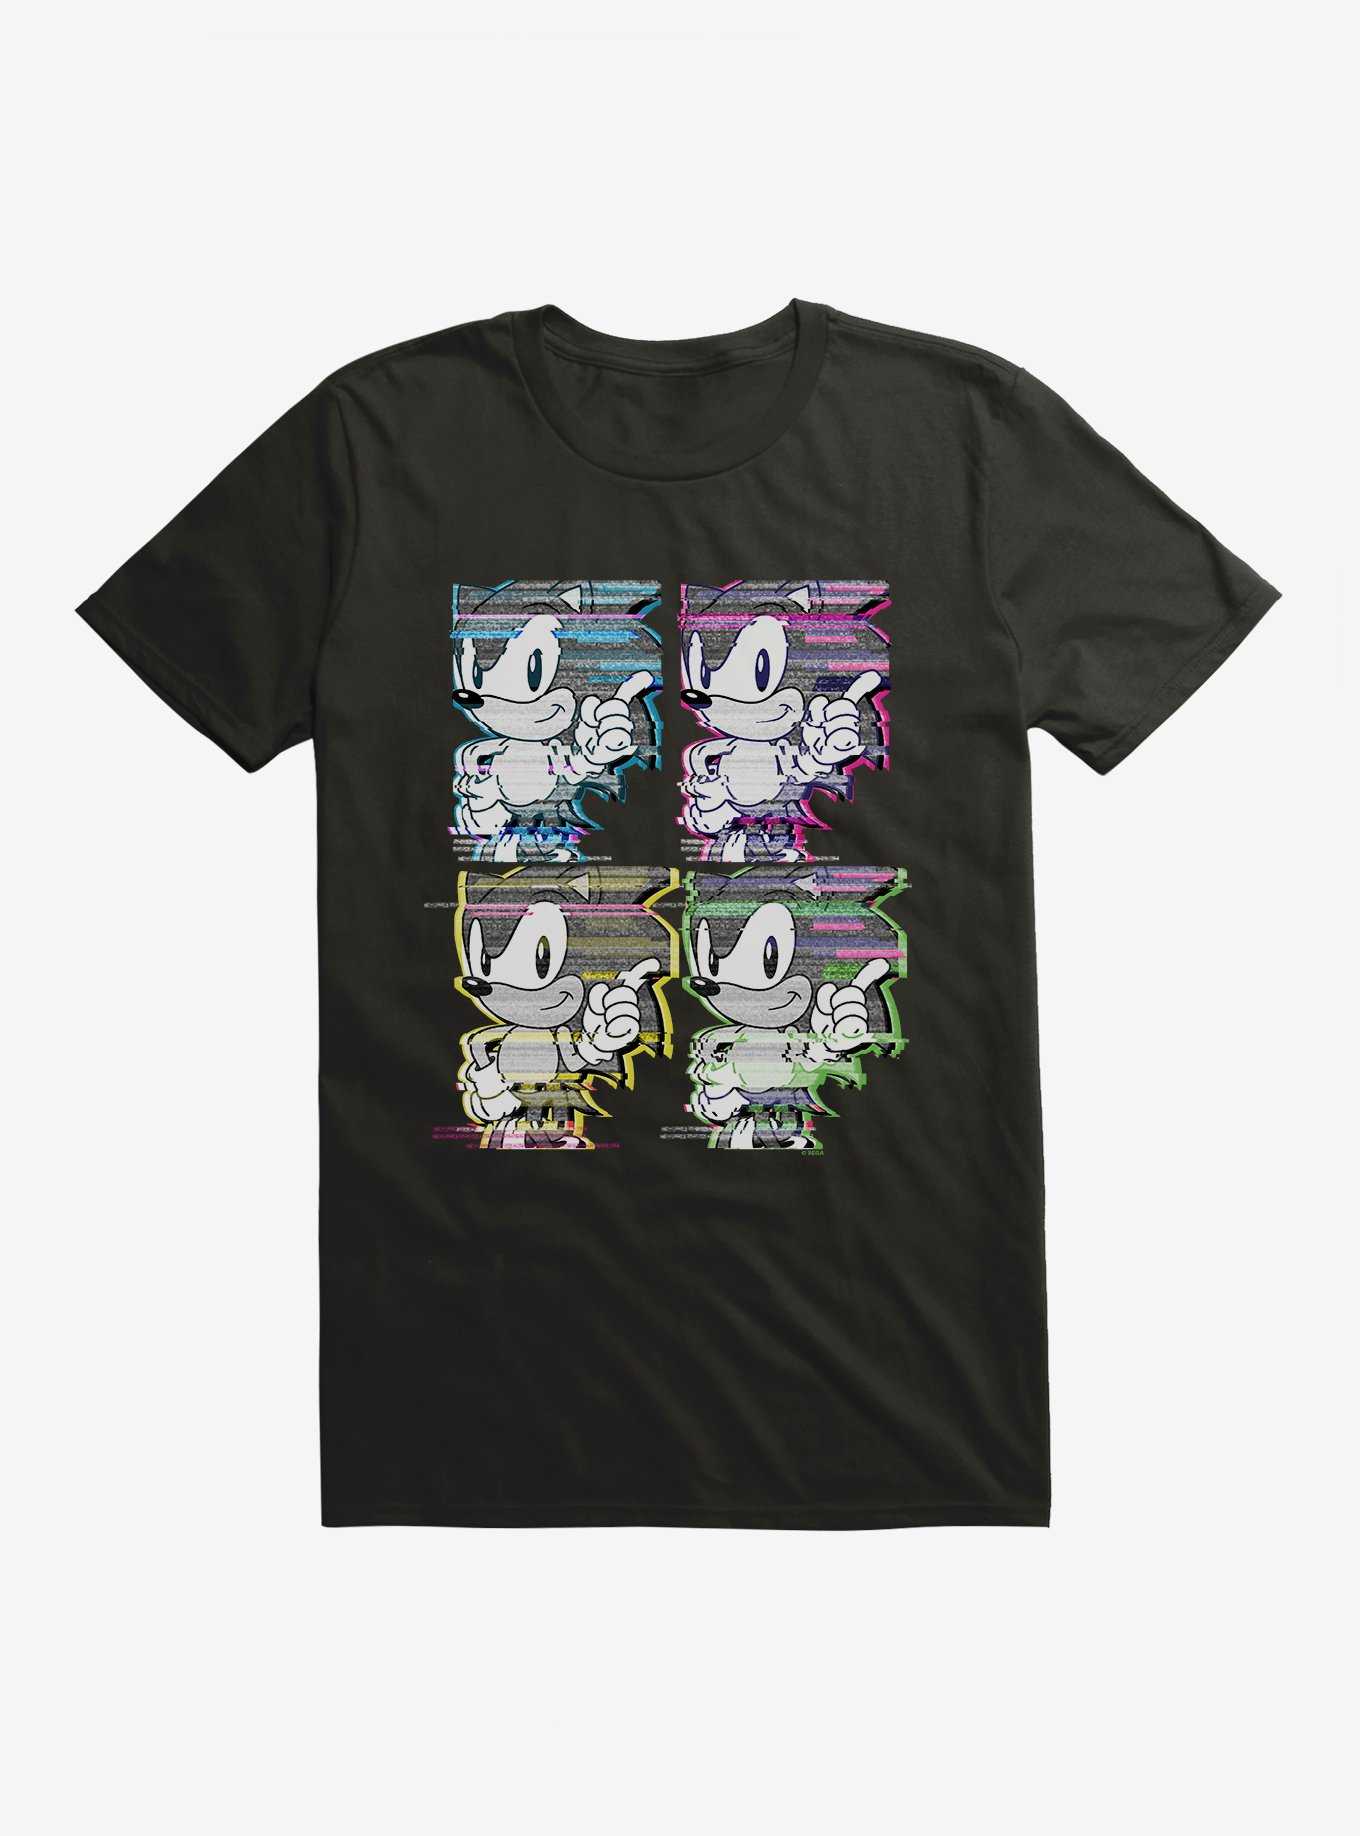 Sonic The Hedgehog Sonic Square Up Glitch T-Shirt, , hi-res